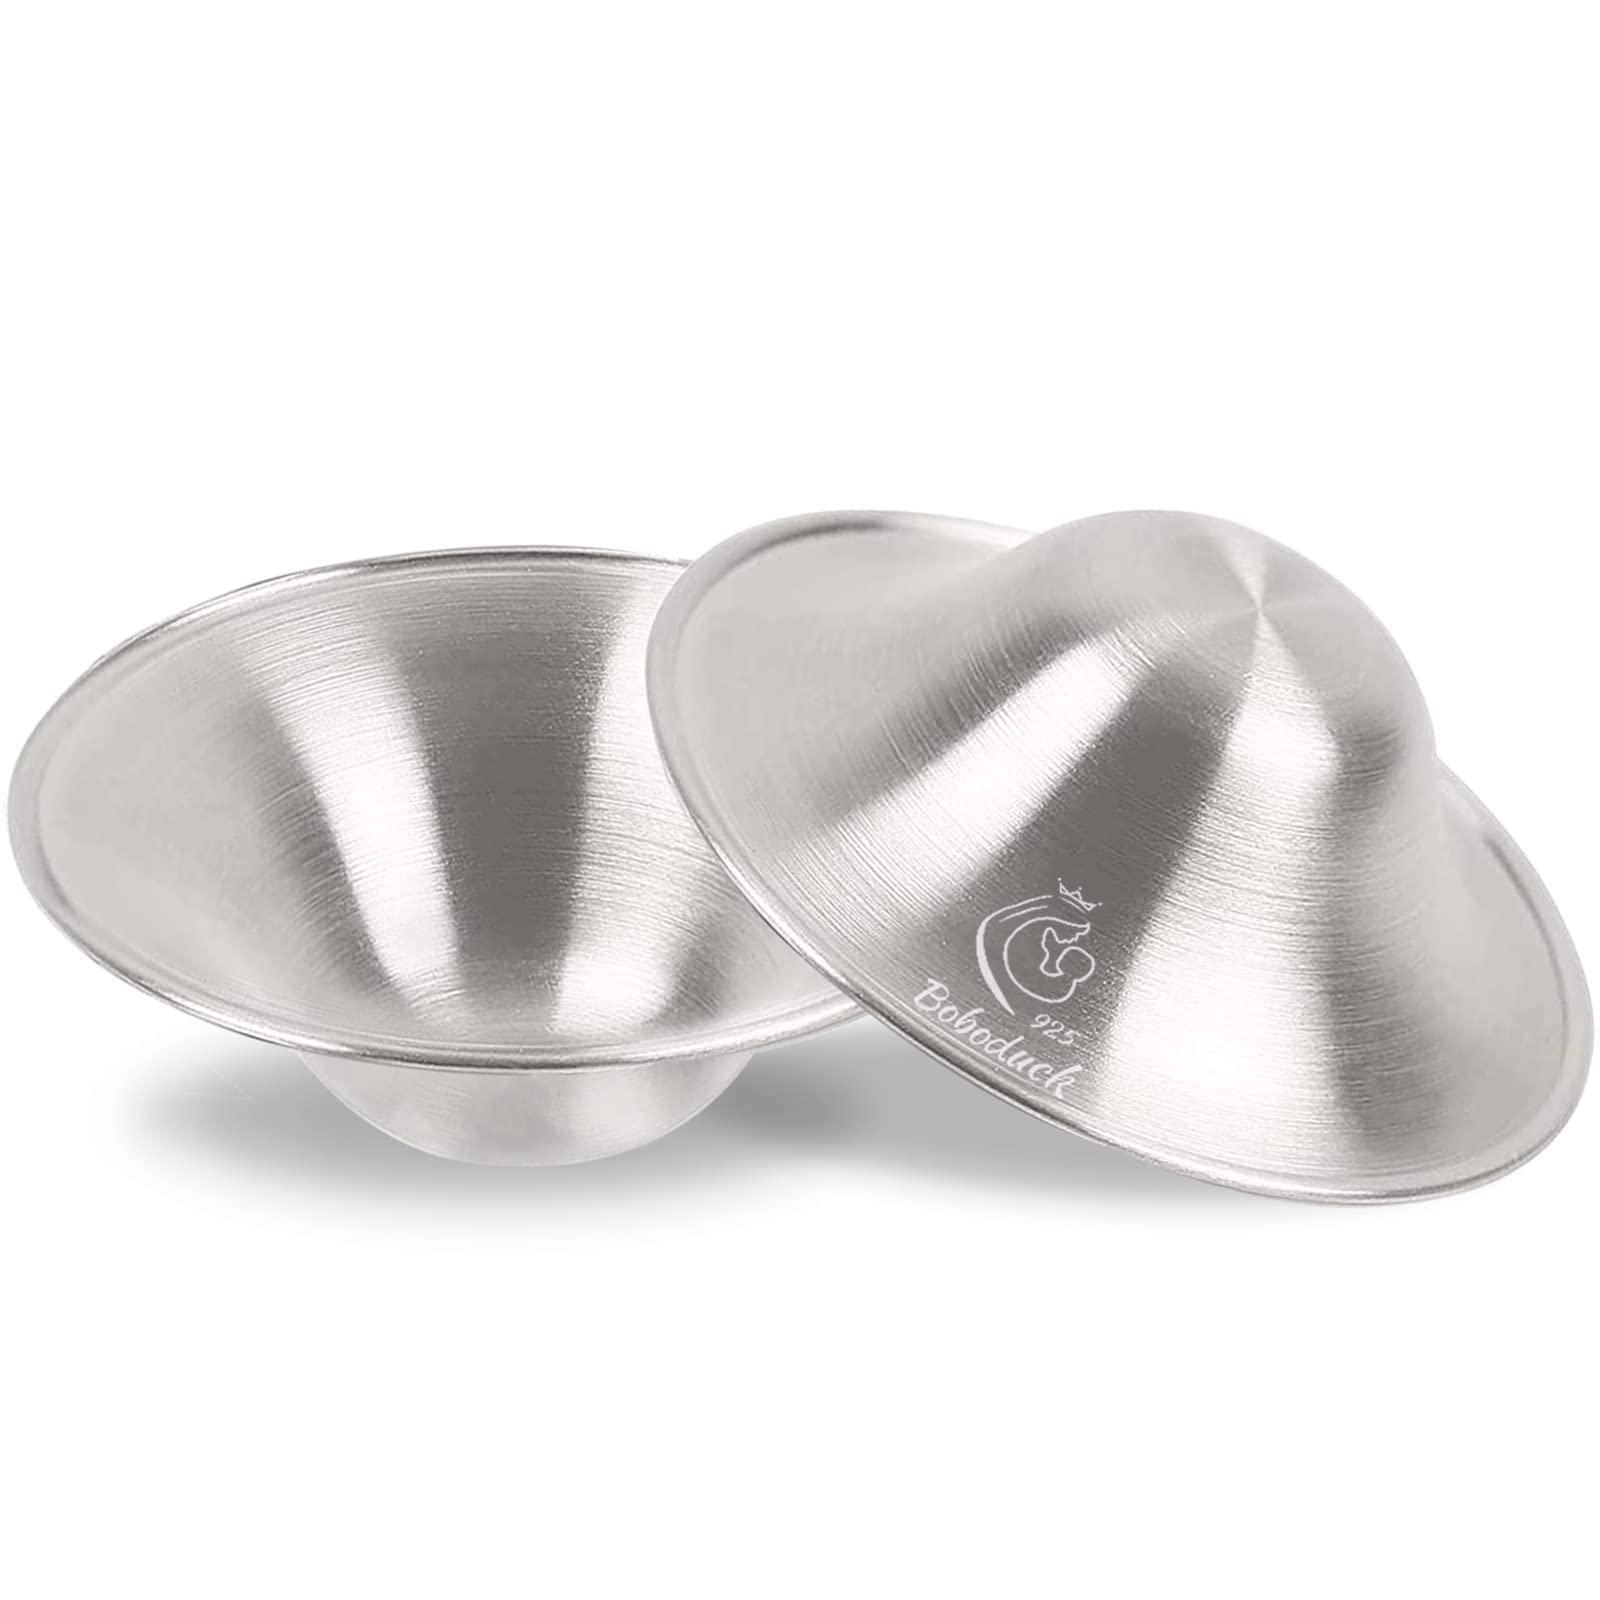 Boboduck The Original Silver Nursing Cups - Nipple Shields for Nursing  Newborn, Newborn Breastfeeding Must Haves for Soothe and Protect Your Nursing  Nipples - Trilaminate 999 Silver (Regular Size)